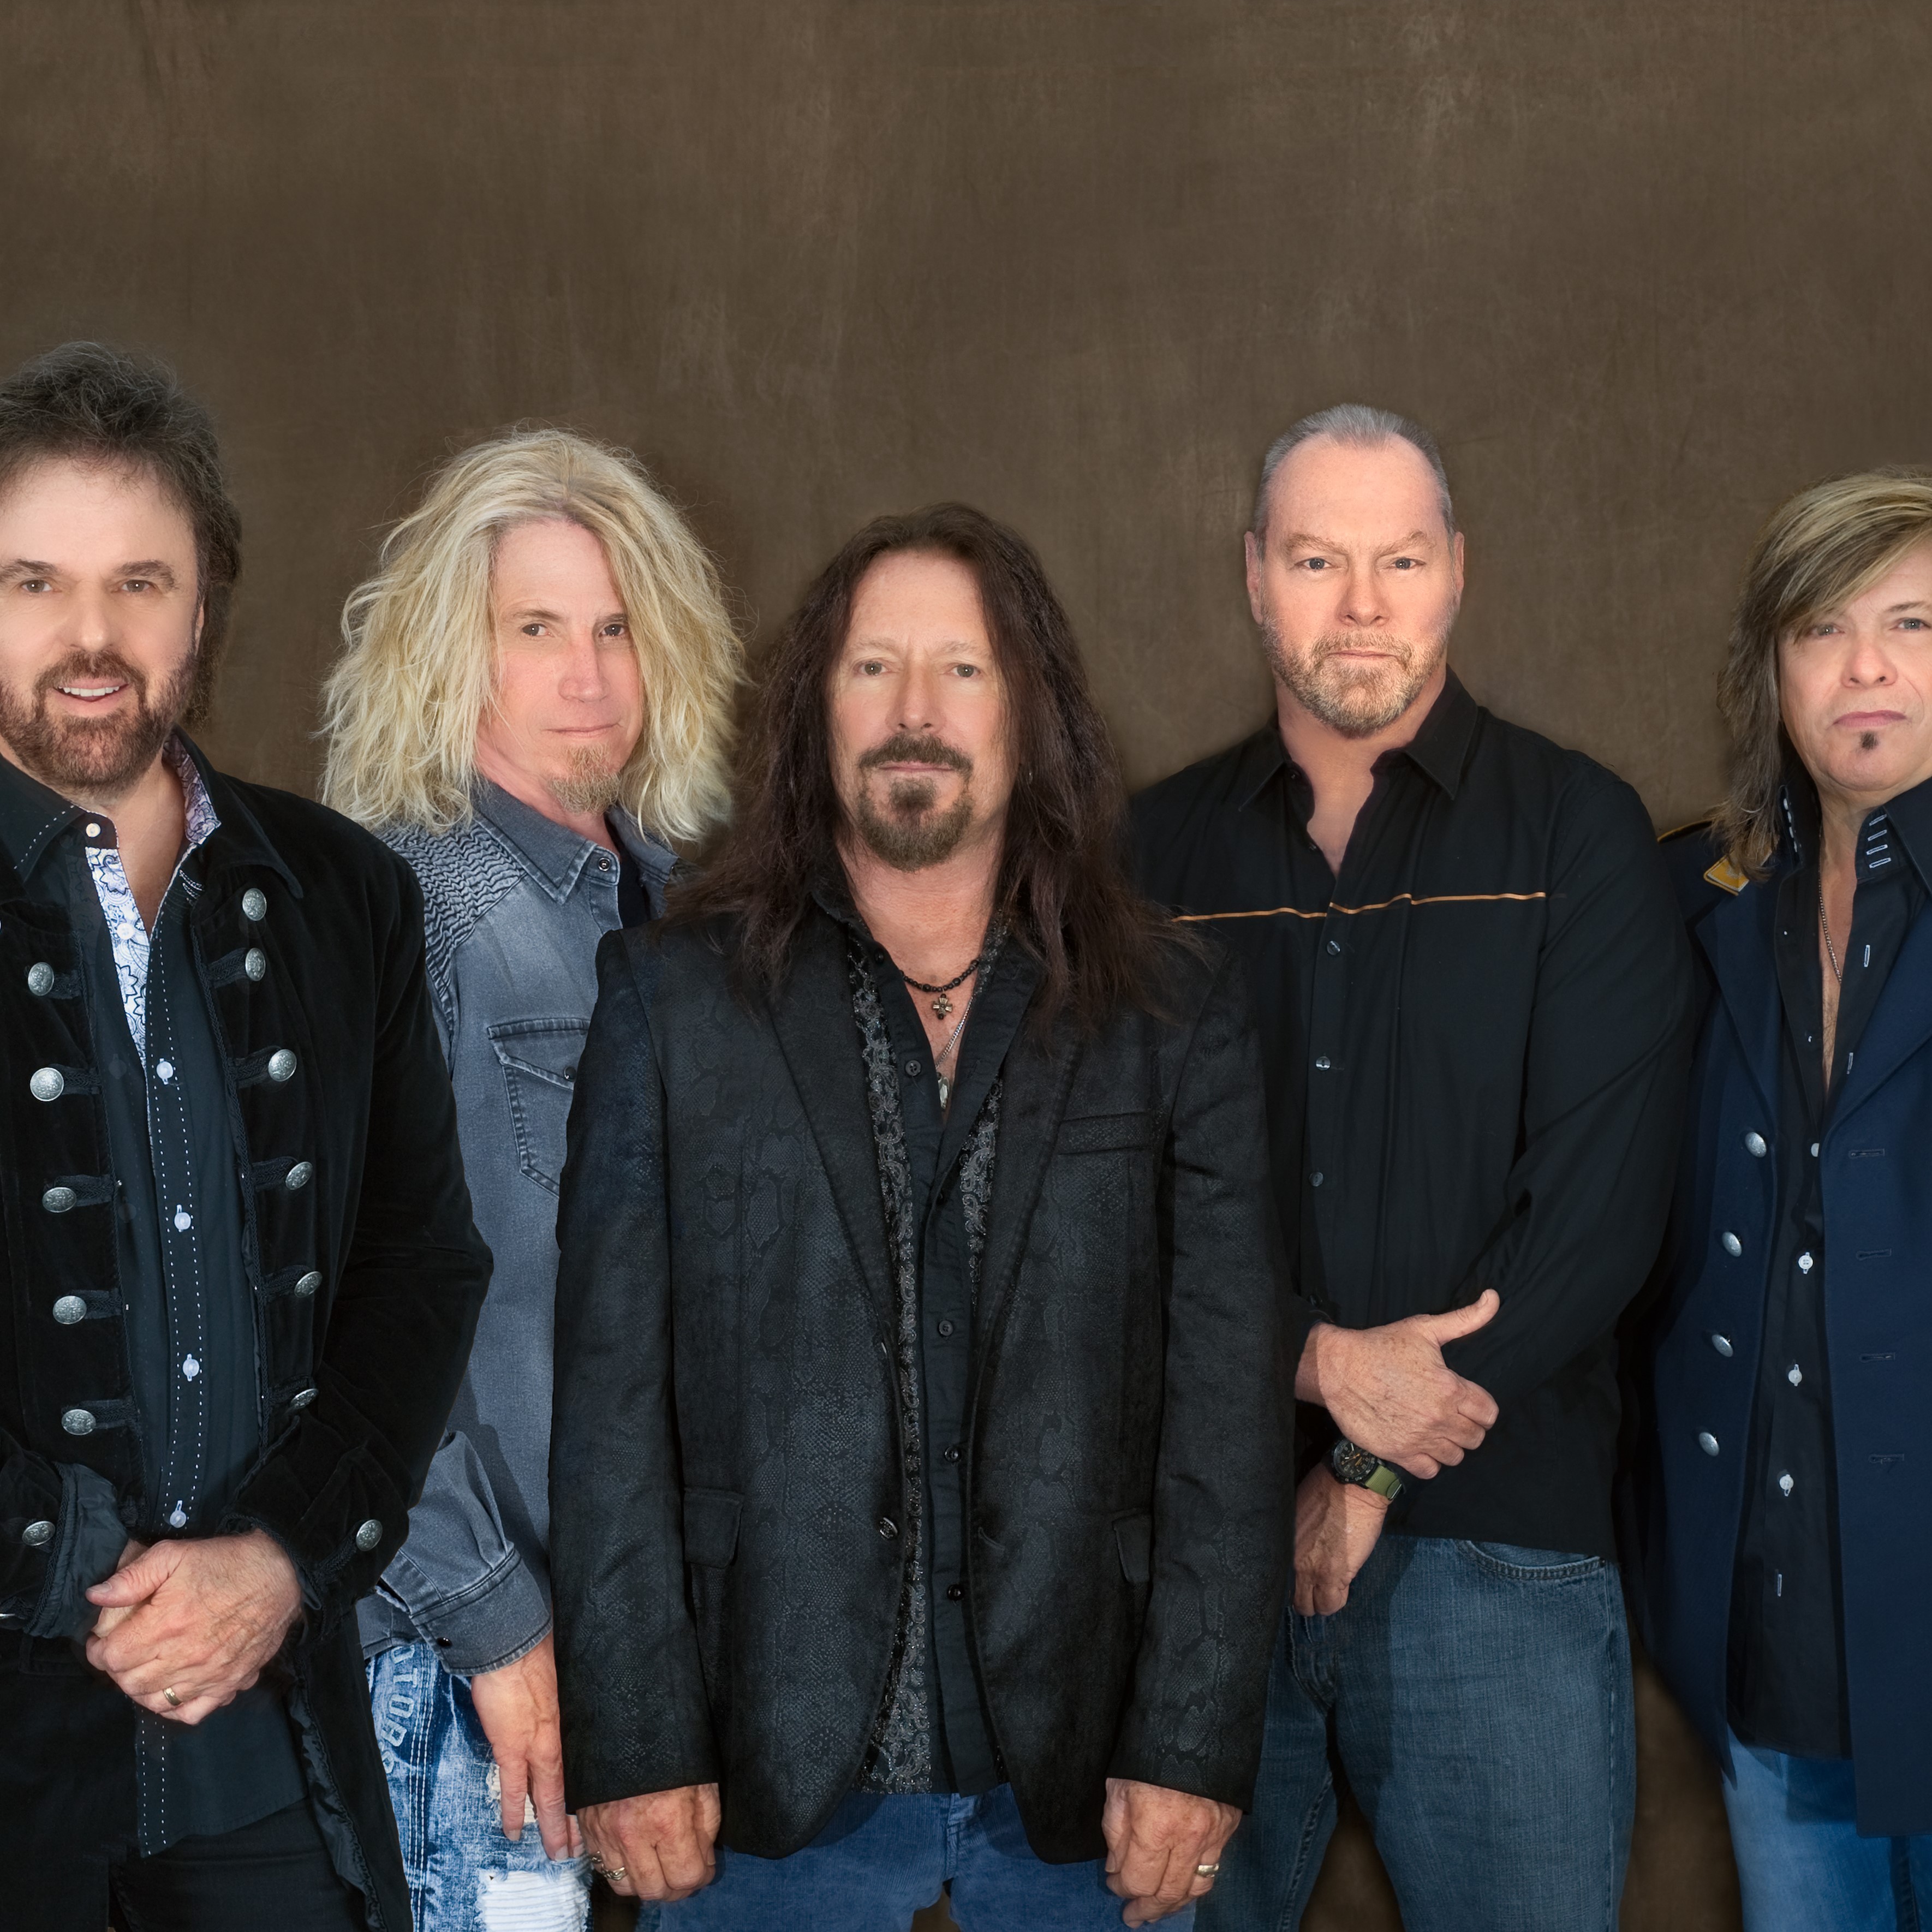 38 special on tour